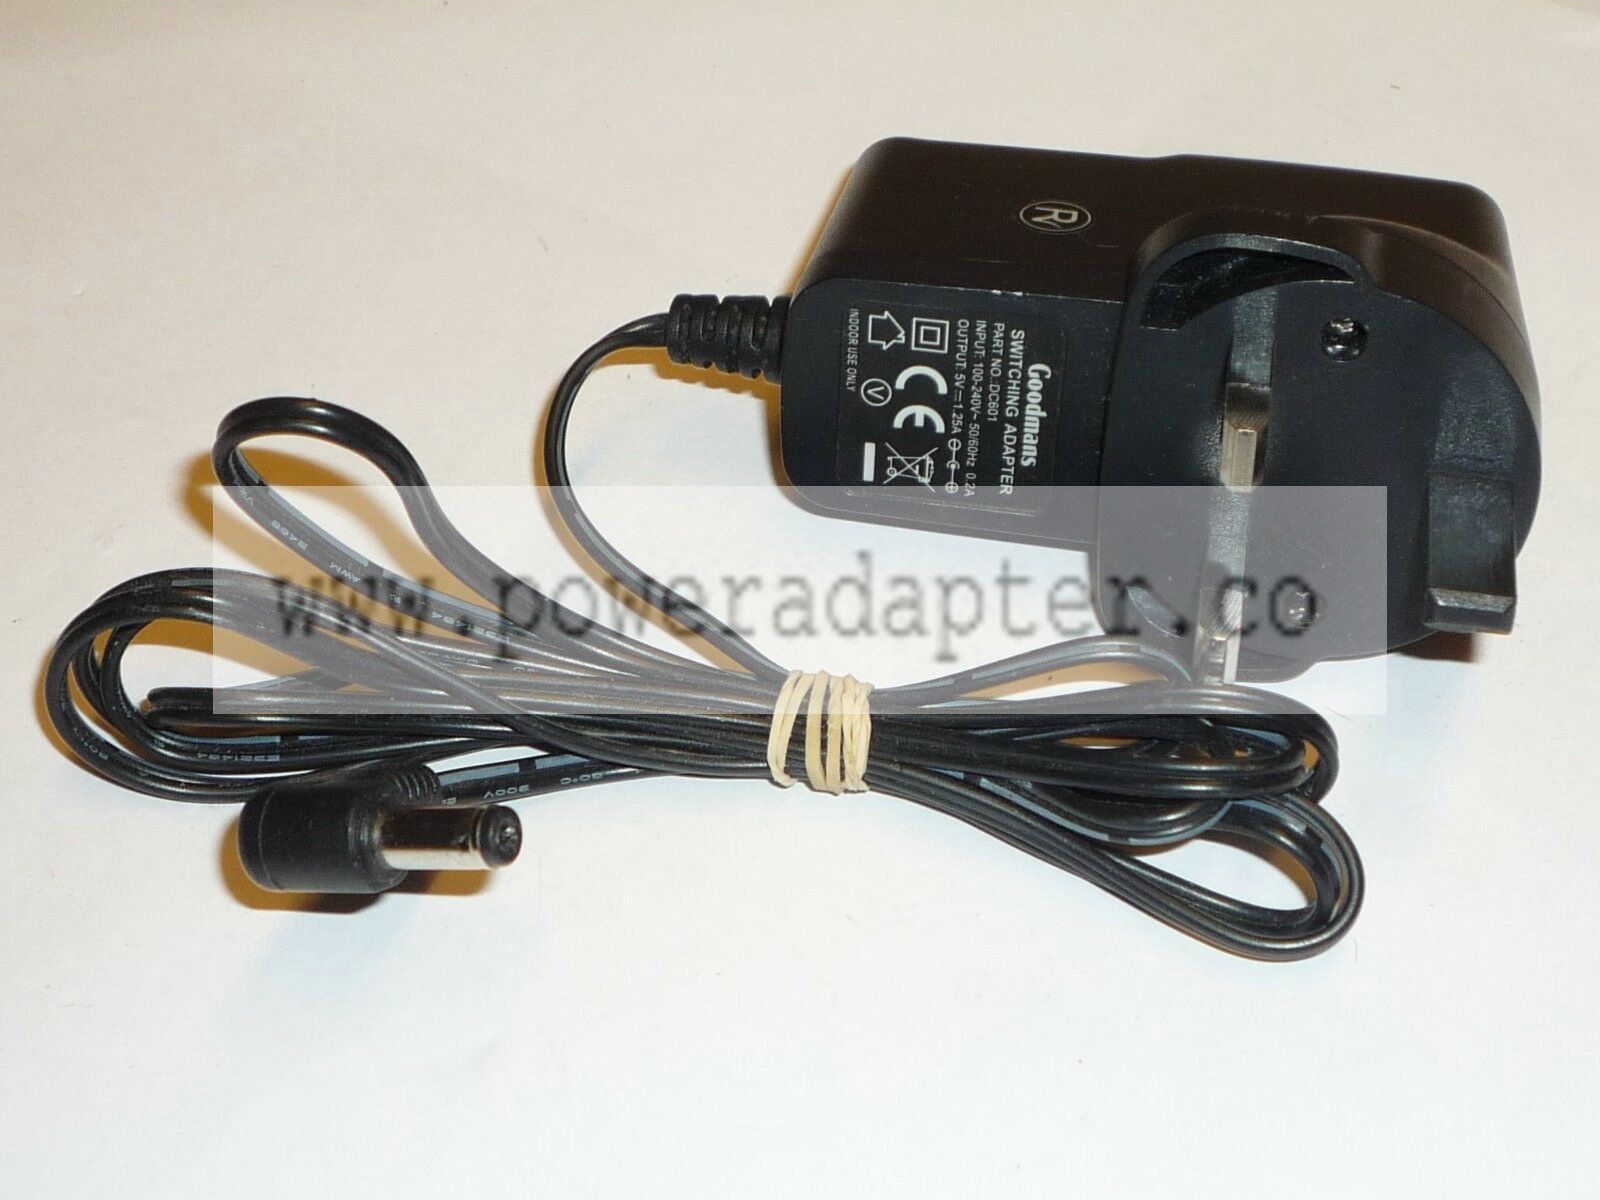 GENUINE GOODMANS ADAPTER POWER SUPPLY ADAPTOR 5V 1.25A DC601 output: 5v 1.25A DC one year warranty and 30days mon - Click Image to Close